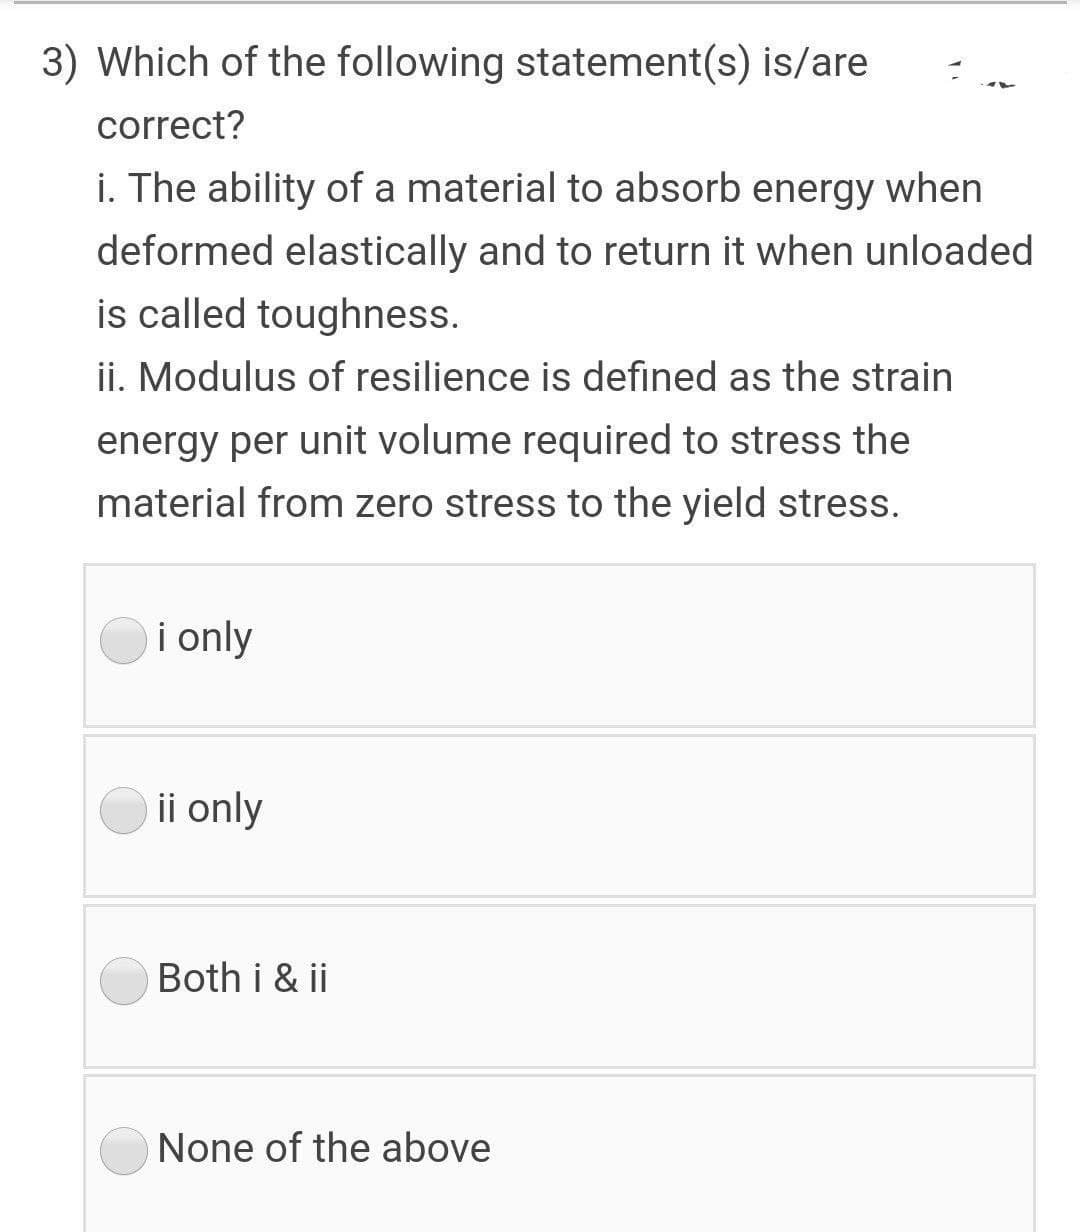 3) Which of the following statement(s) is/are
correct?
i. The ability of a material to absorb energy when
deformed elastically and to return it when unloaded
is called toughness.
ii. Modulus of resilience is defined as the strain
energy per unit volume required to stress the
material from zero stress to the yield stress.
i only
ii only
Both i & ii
None of the above
